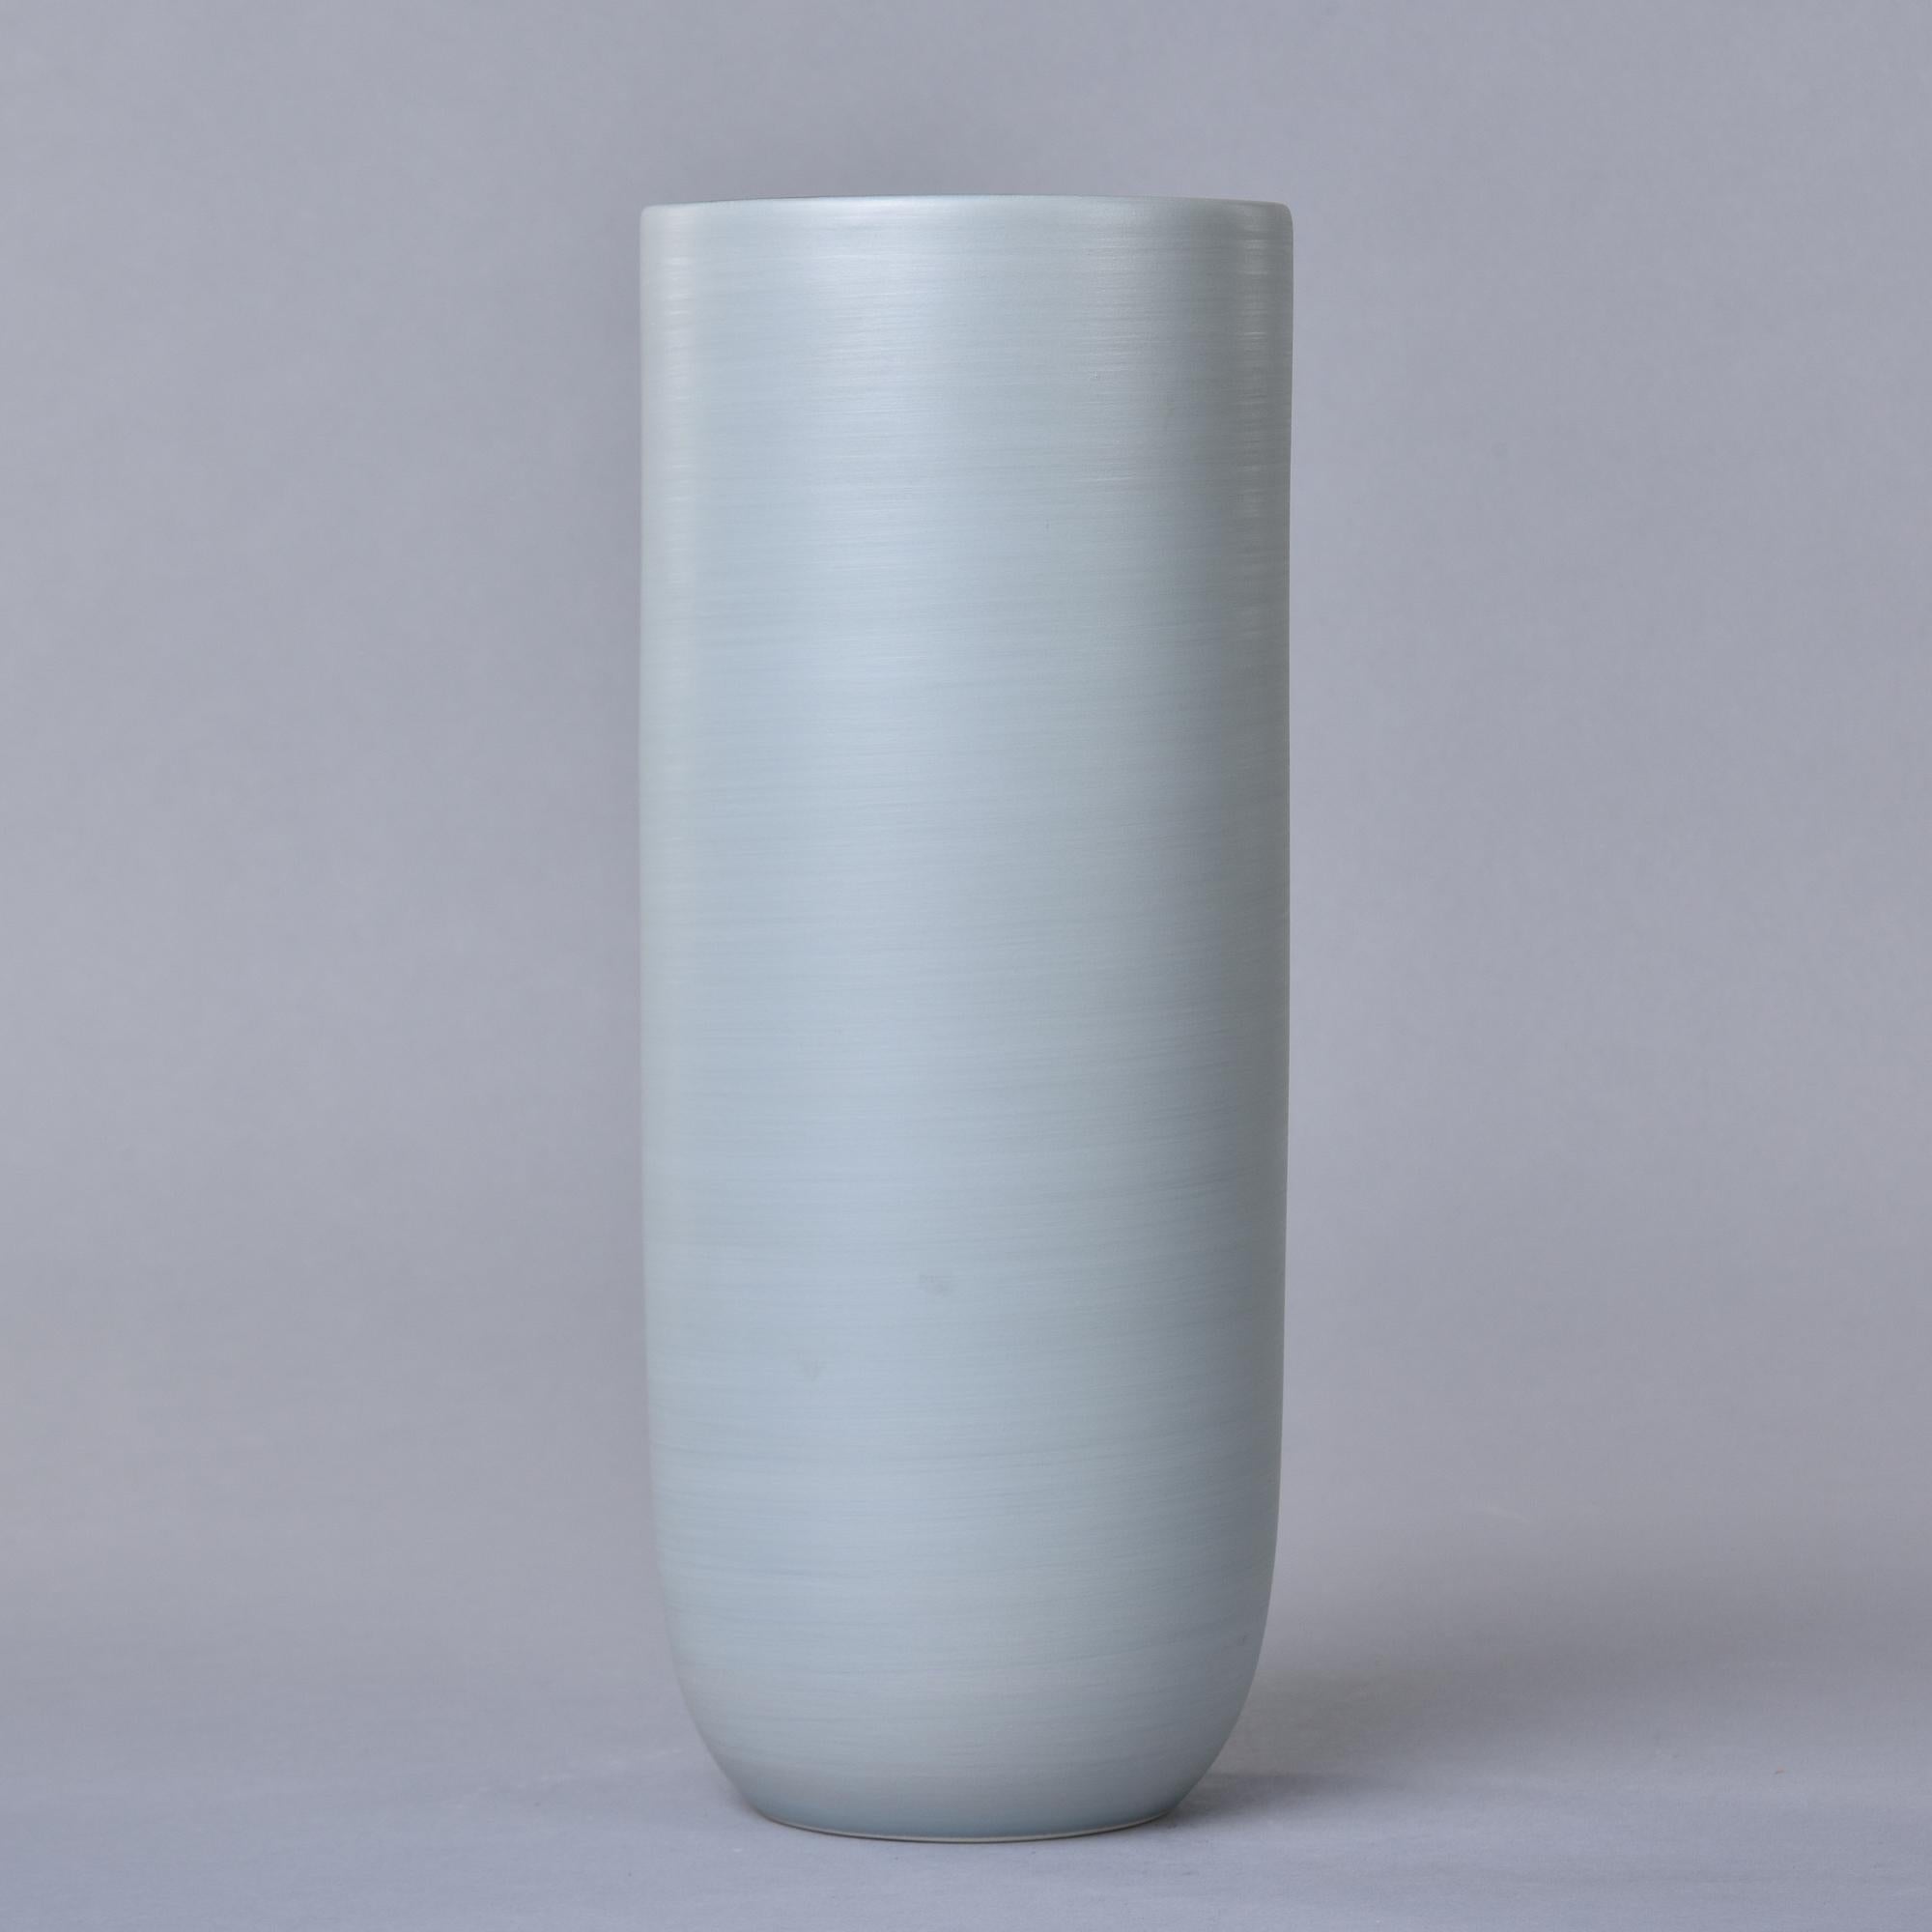 New and made in Italy by Rina Menardi, this tall Canna 1 vase stands over 12” tall. The vessel has a pale green tea colored glaze and a matte black interior glaze. Rina Menardi calls this shade of green bamboo. Signed on underside of base by the